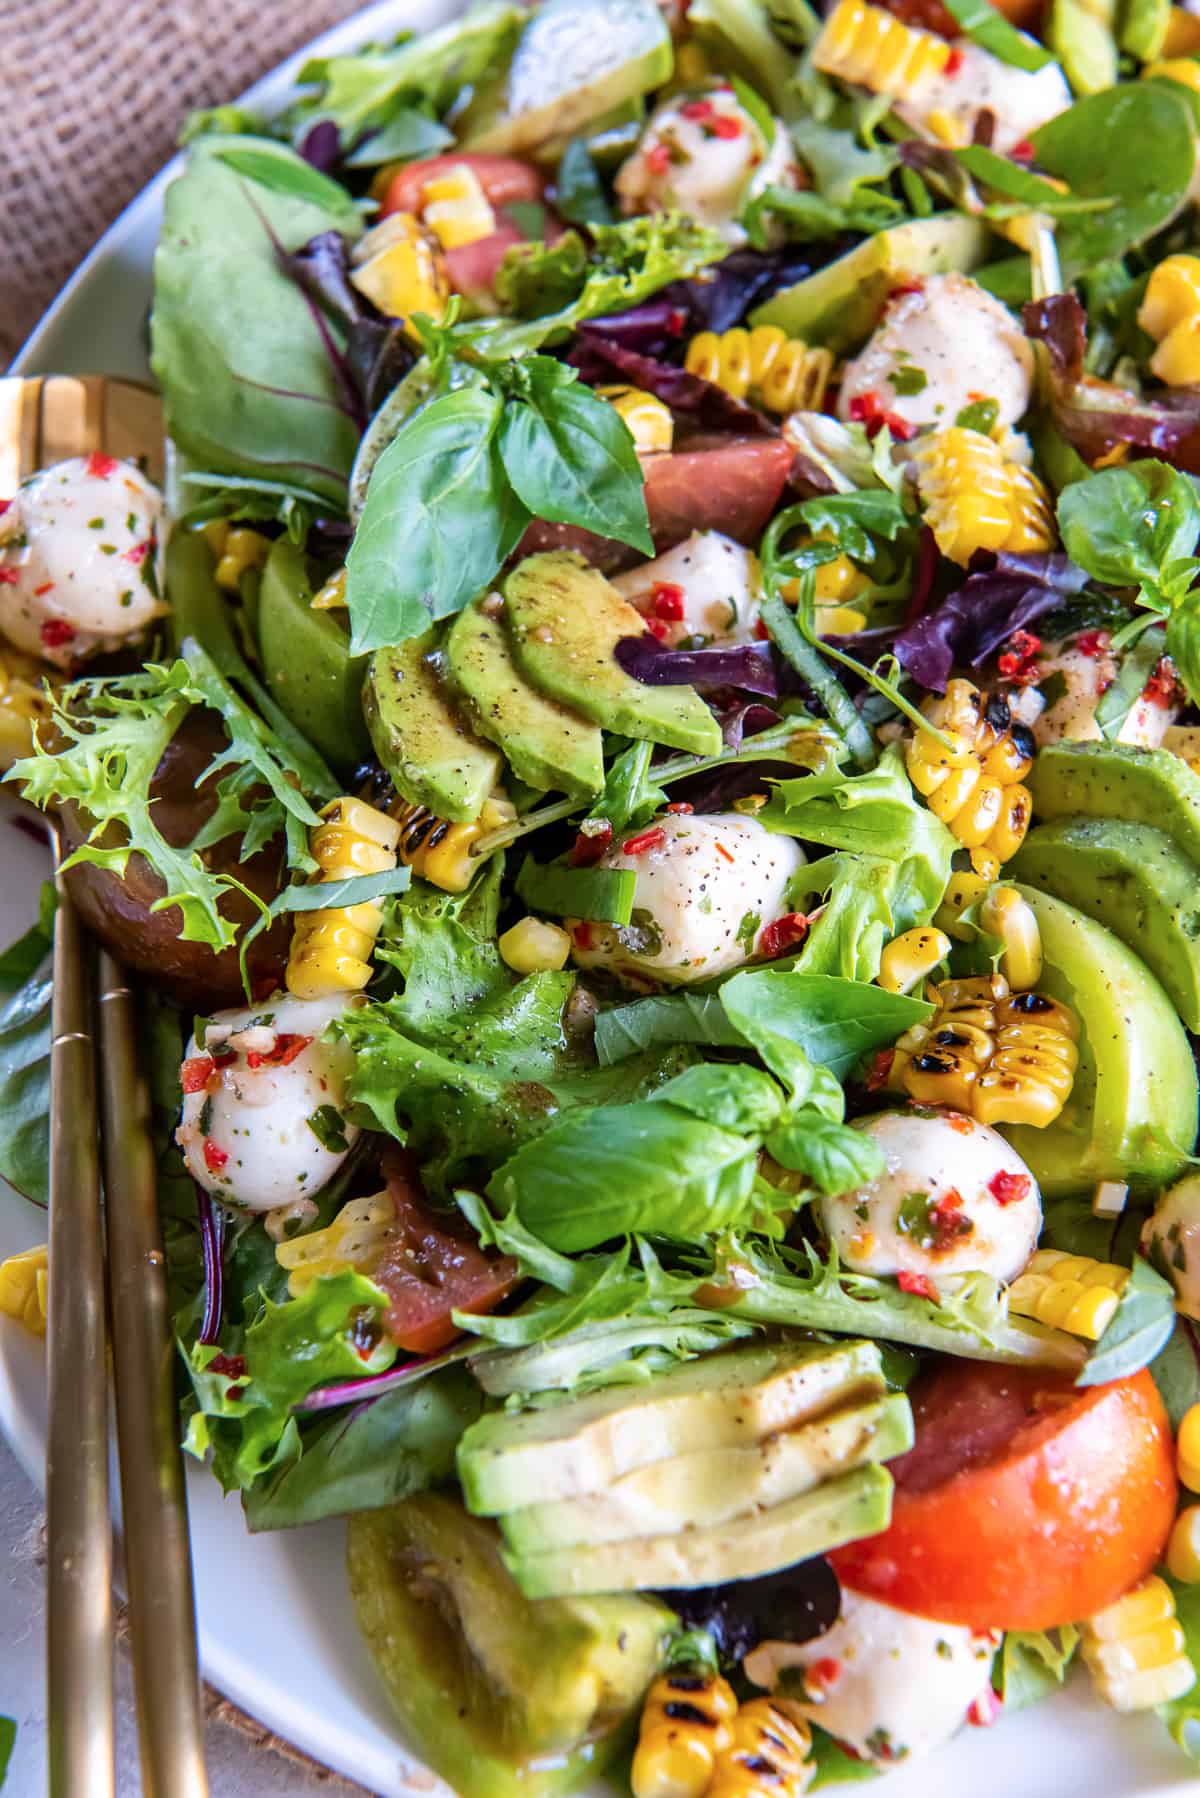 A close up of a salad with tomatoes, marinated mozzarella, avocado, and corn on a bed of greens.